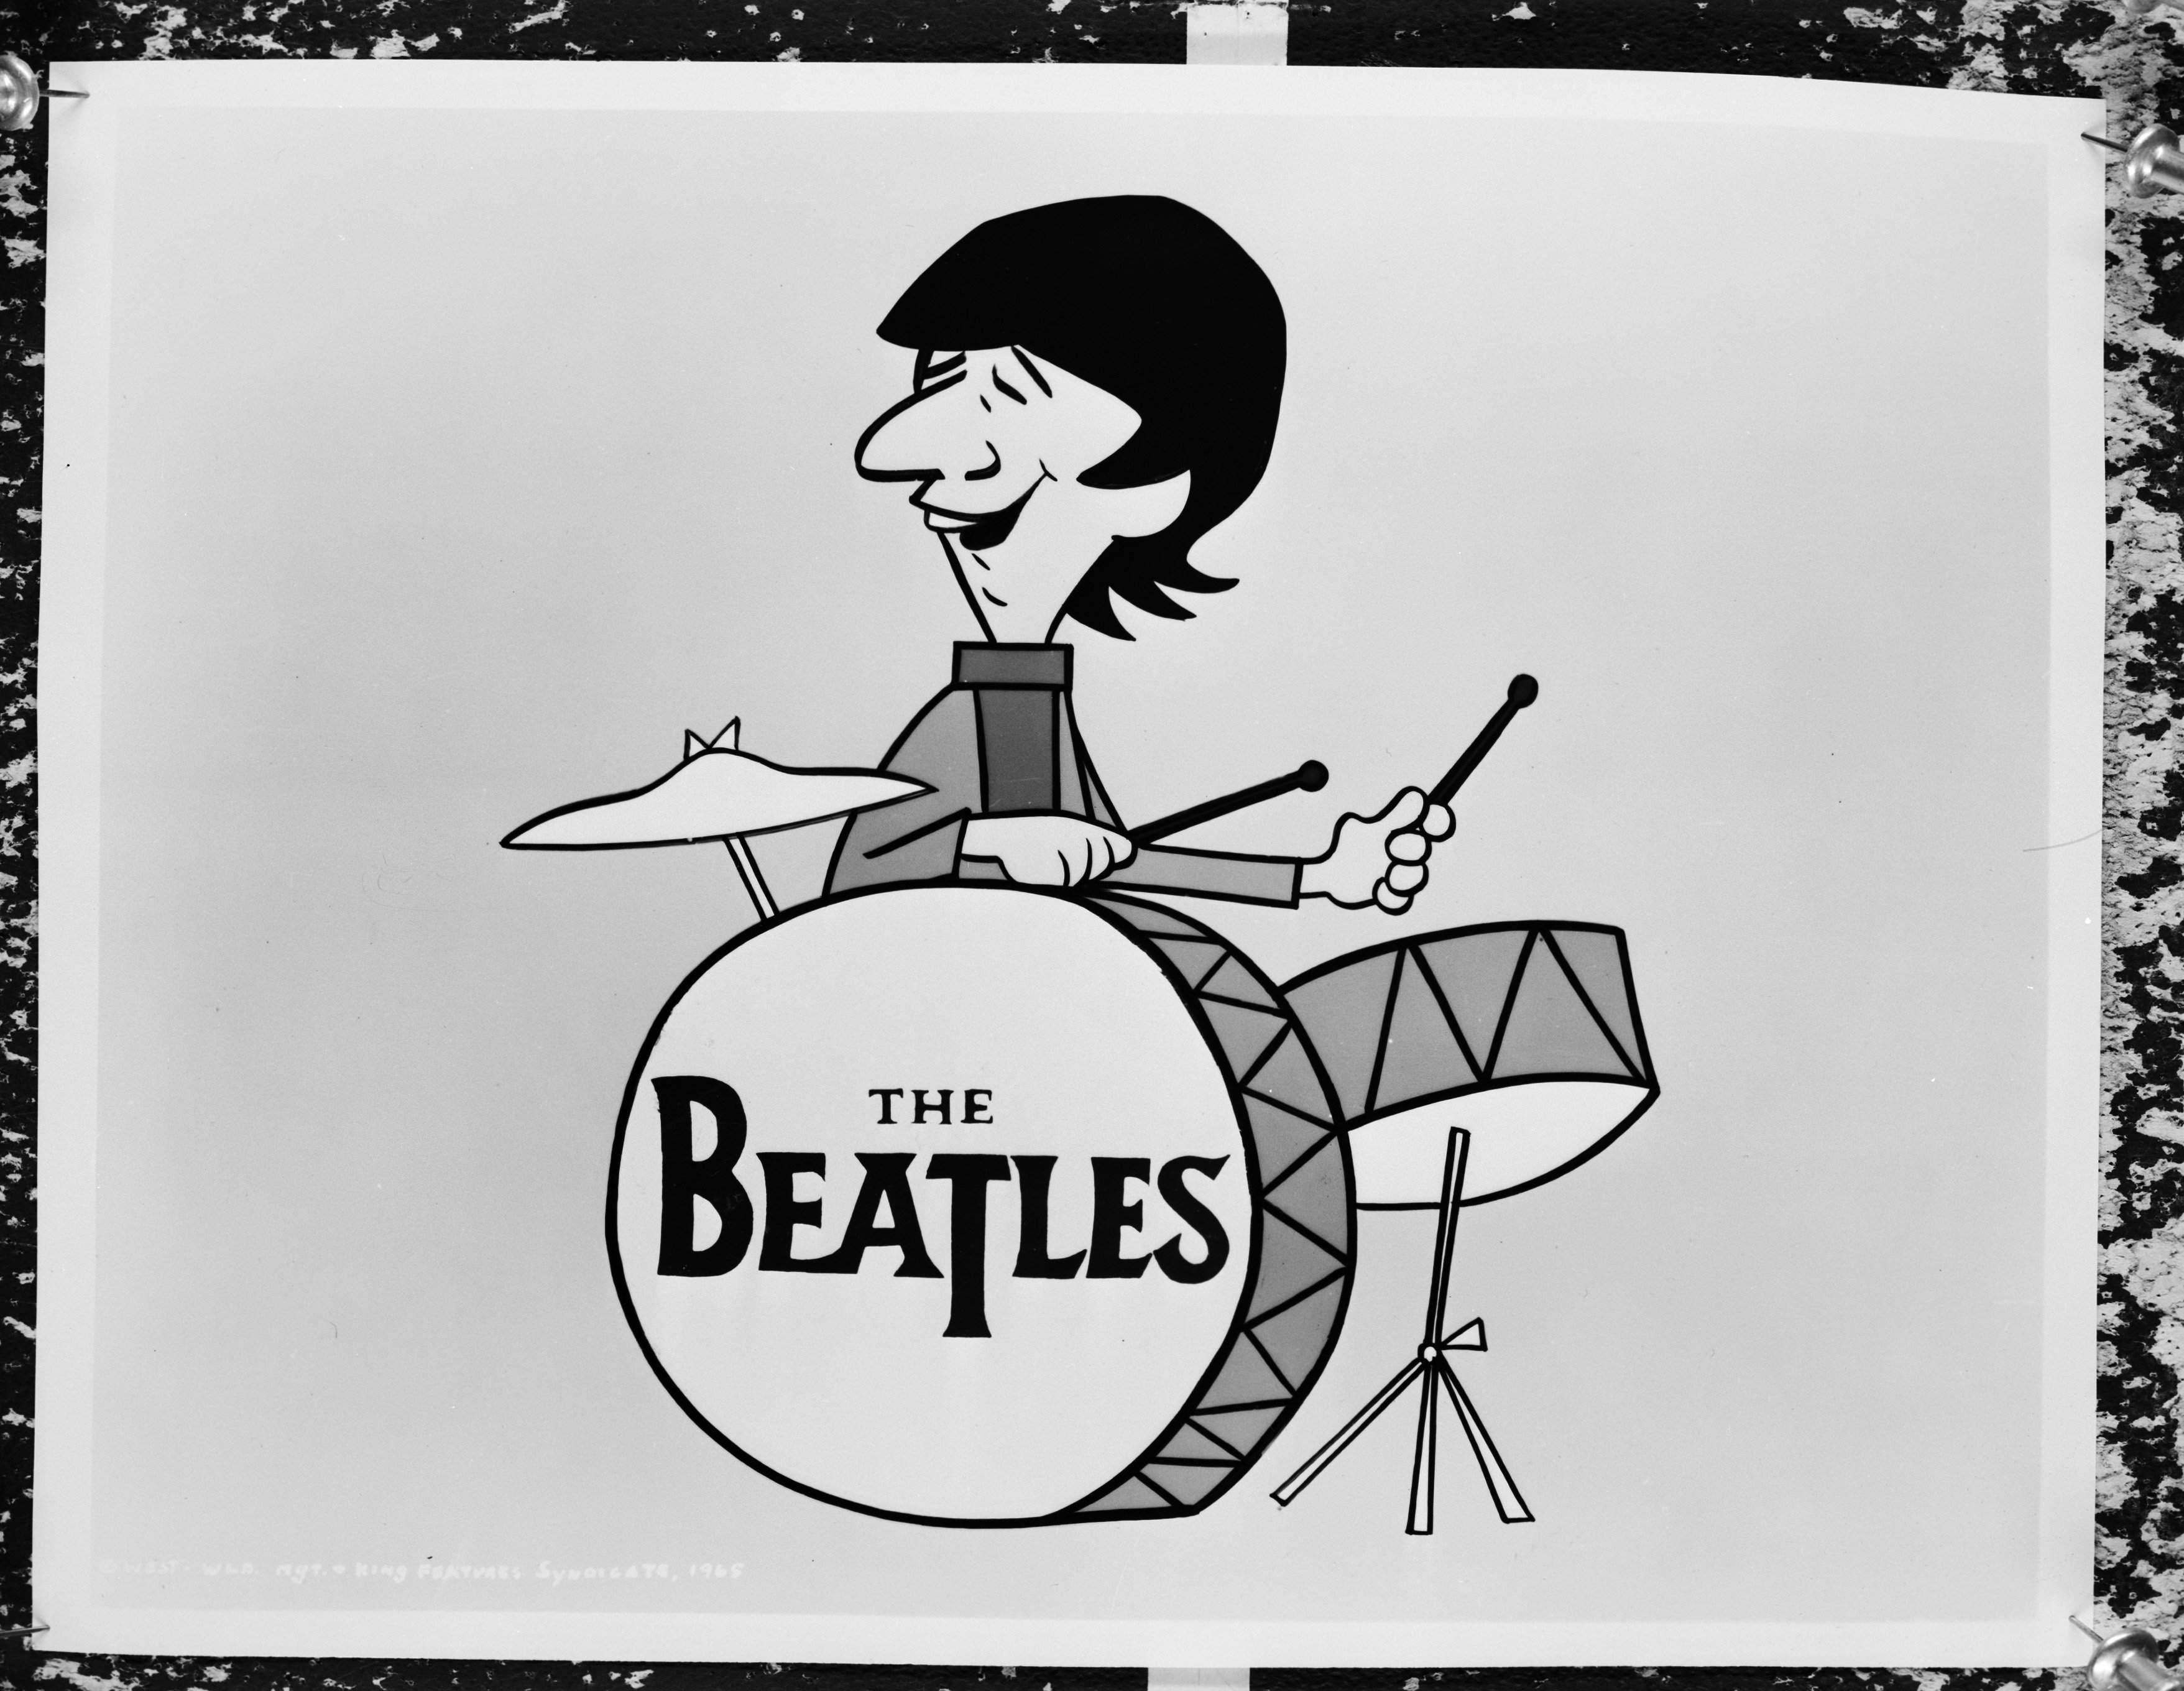 Ringo Starr playing songs in The Beatles' cartoon